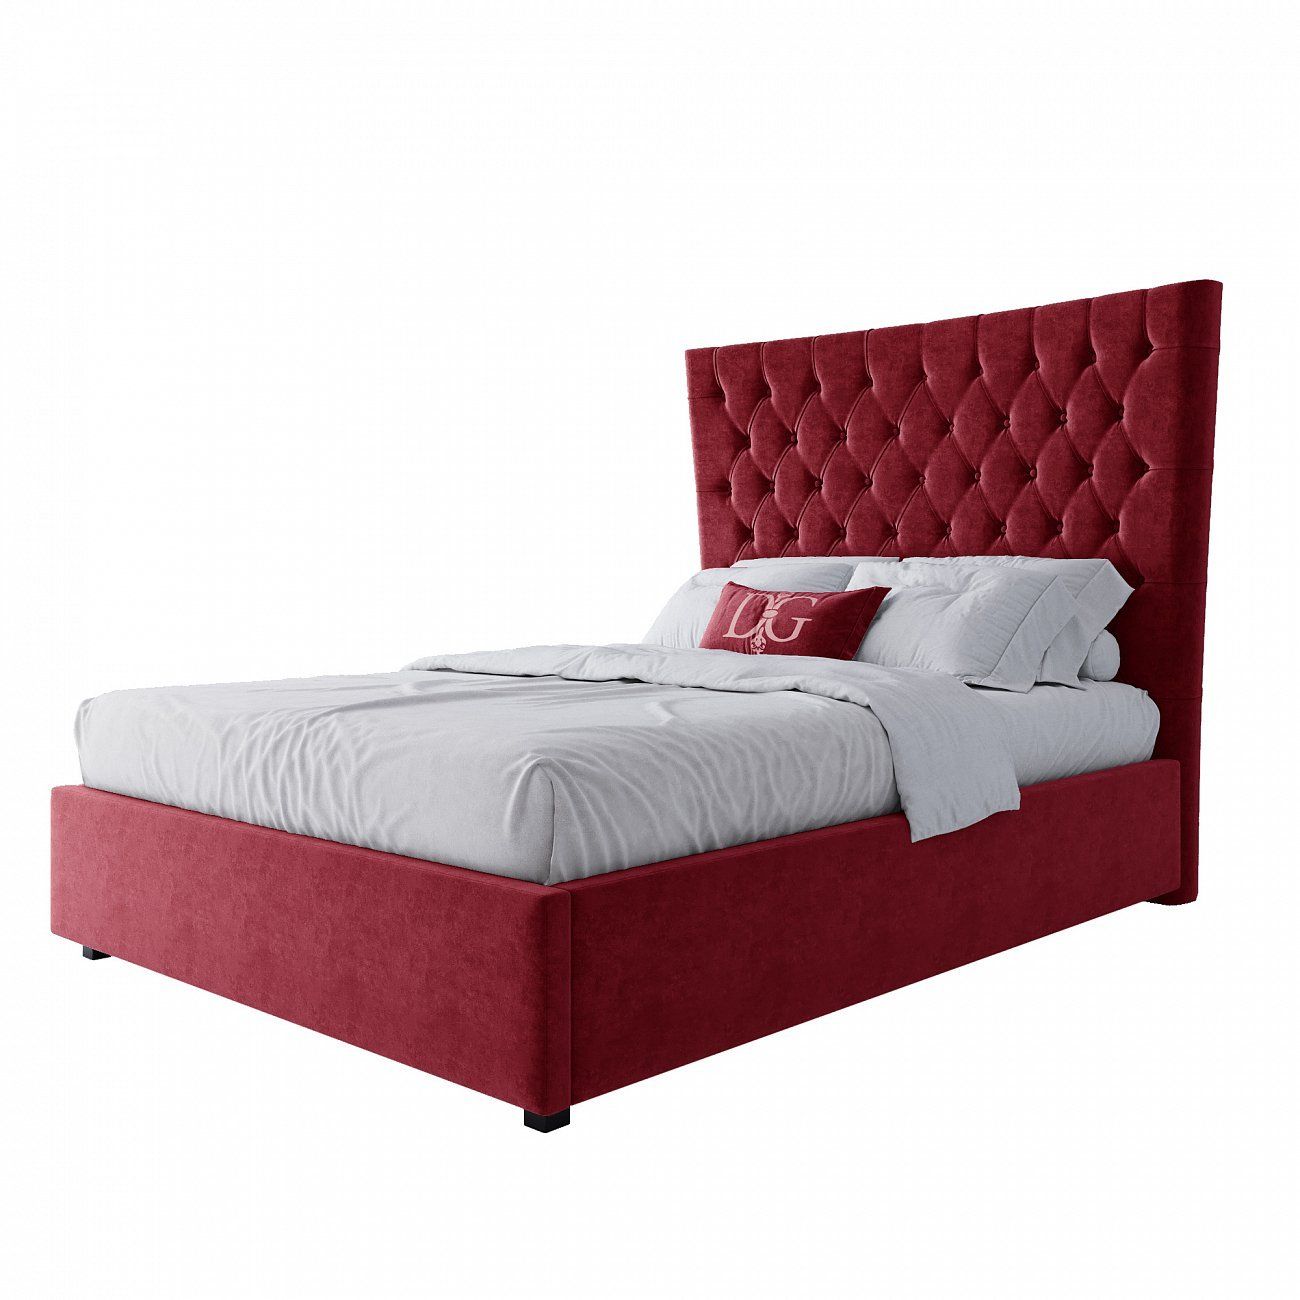 Teenage bed with carriage screed 140x200 cm red QuickSand